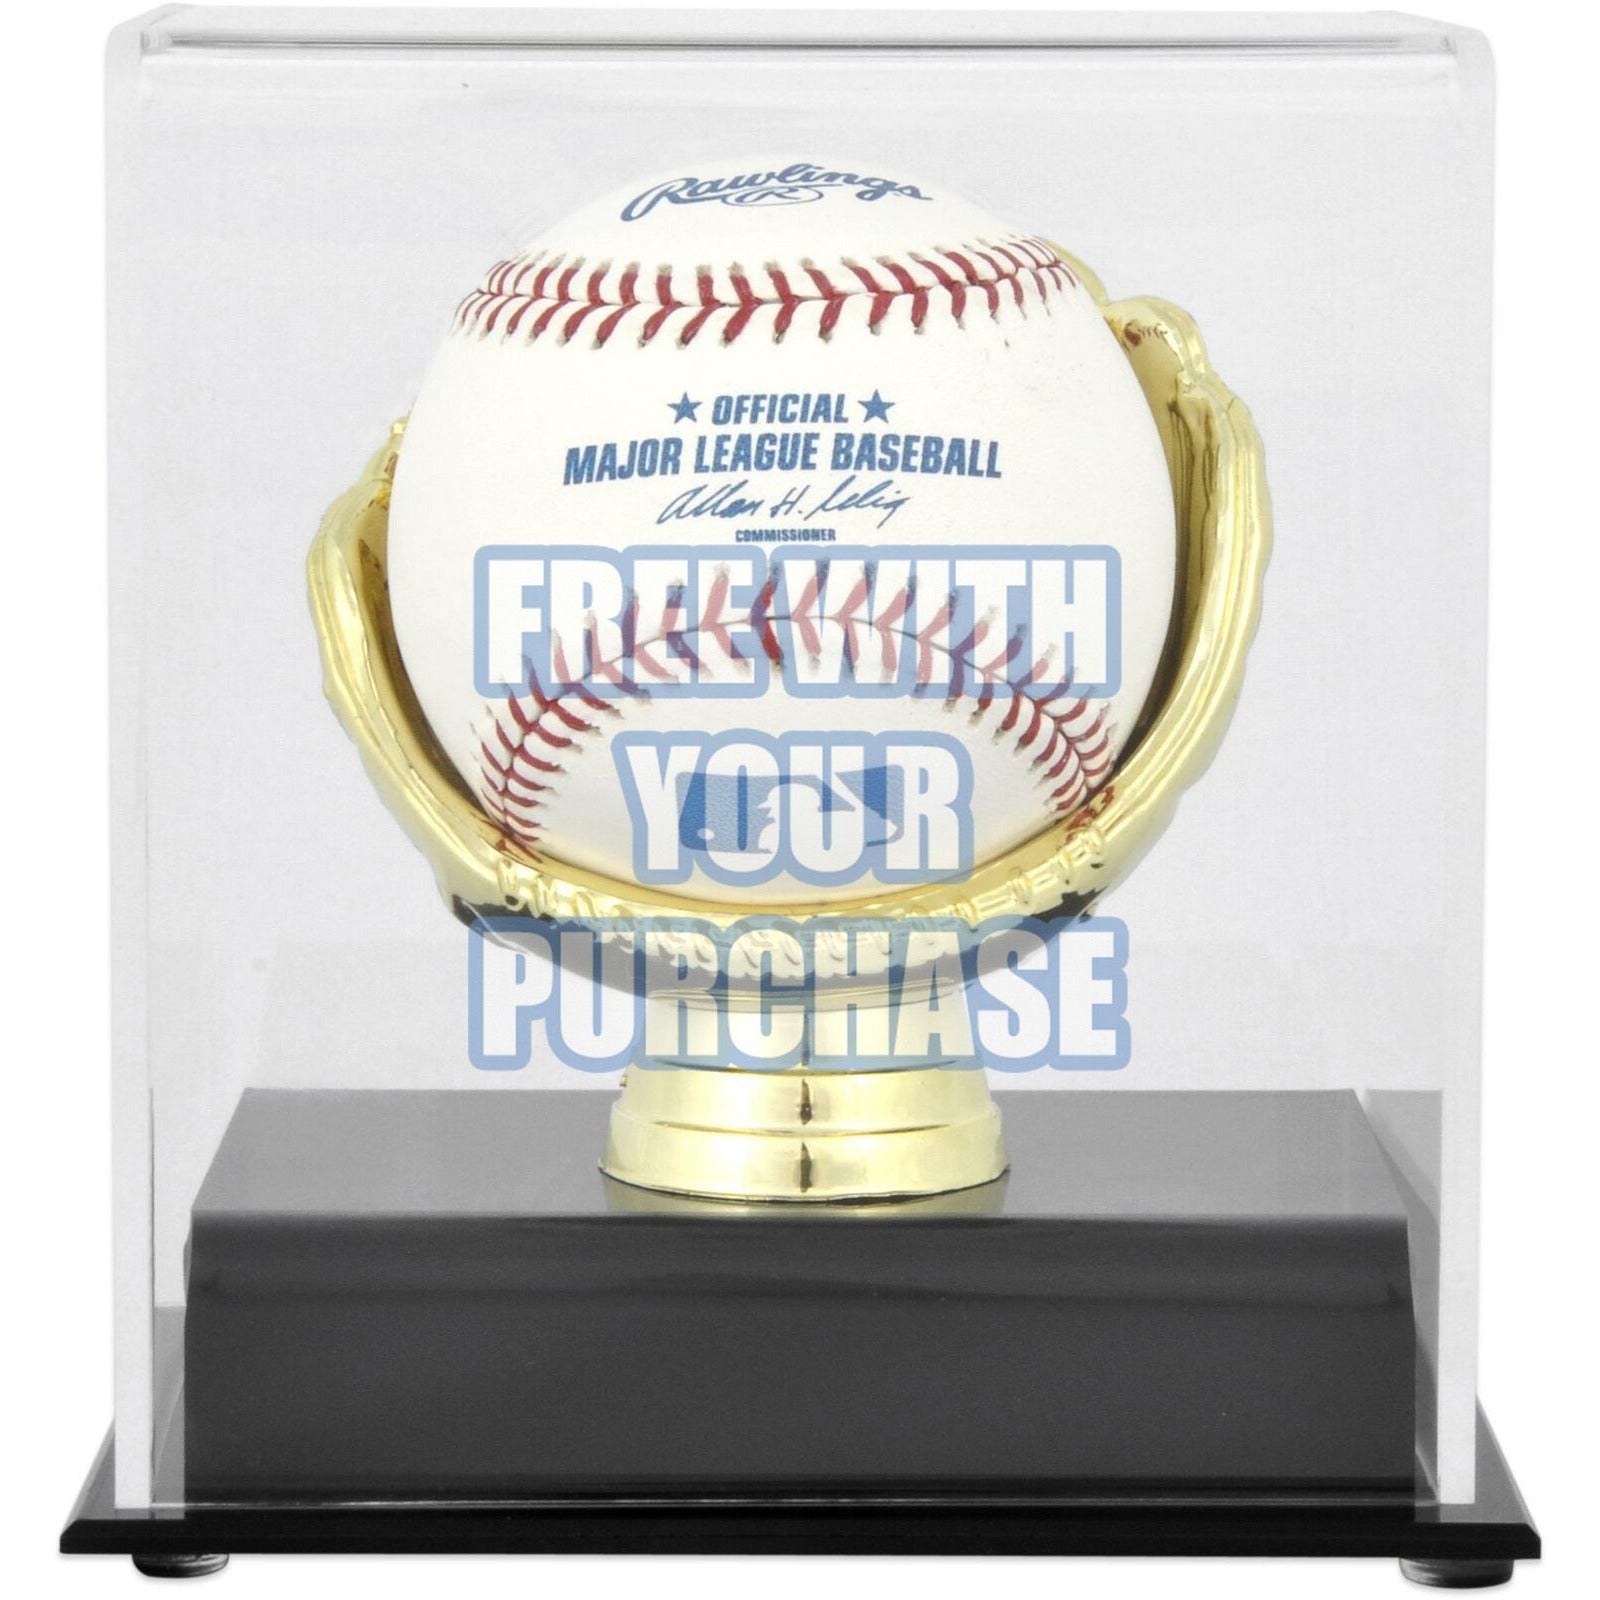 Zach Wheeler and Aaron Nola Philadelphia Phillies Rawlings MLB baseball signed with proof and free case